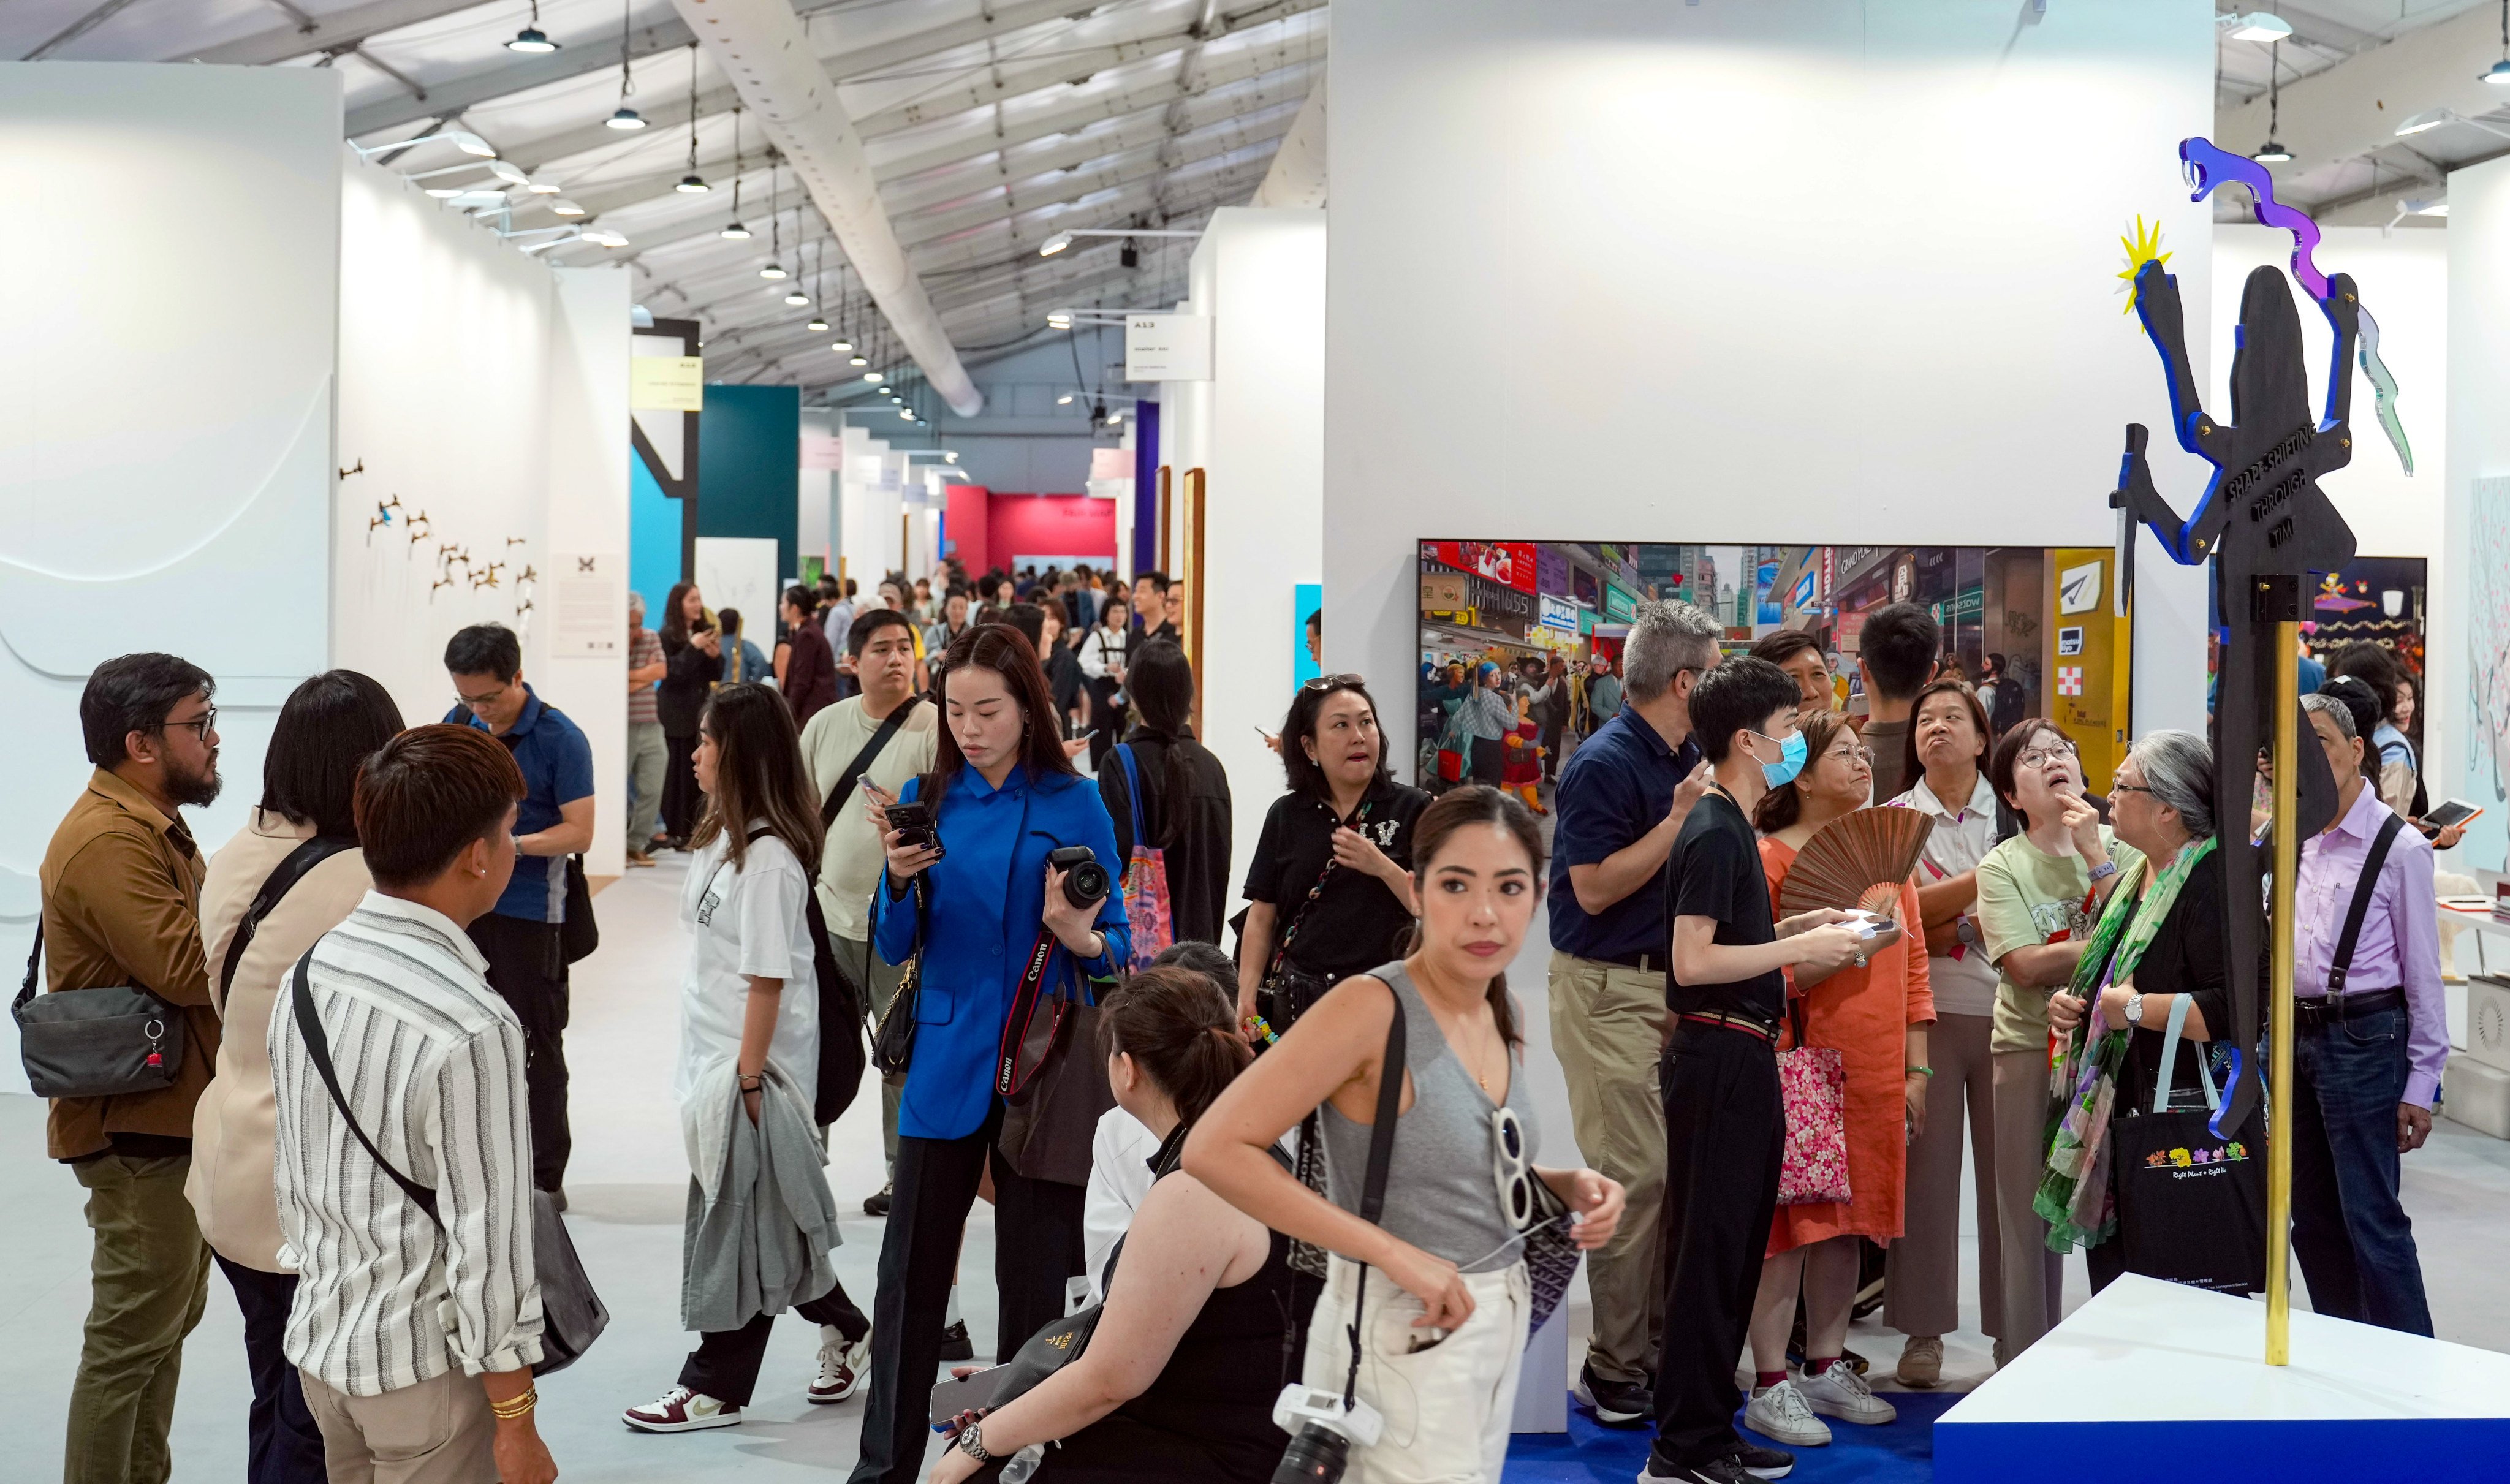 People visit Art Central, one of the events taking place during “Art March”. Photo: Sam Tsang